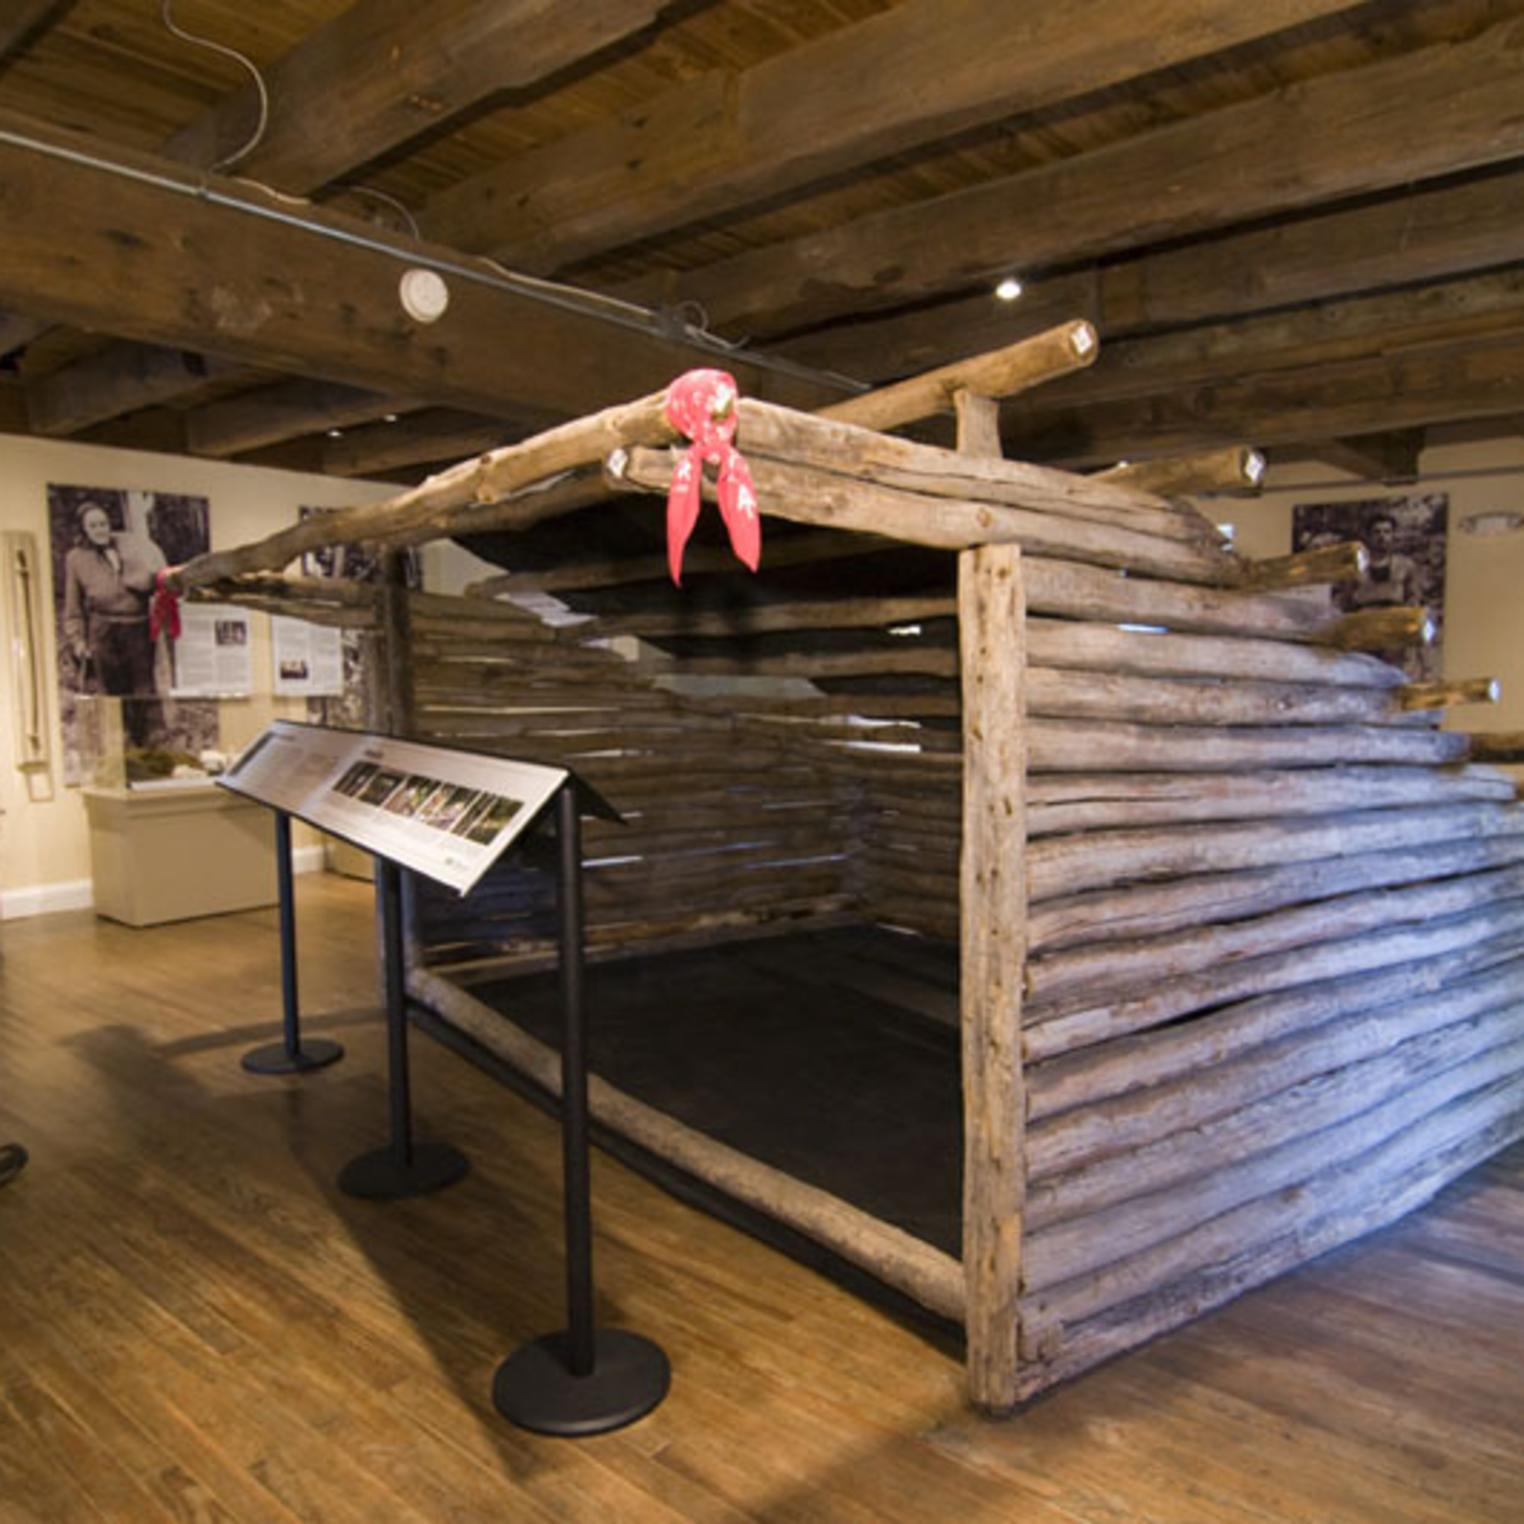 The Earl Shaffer shelter at the Appalachian Trail Museum